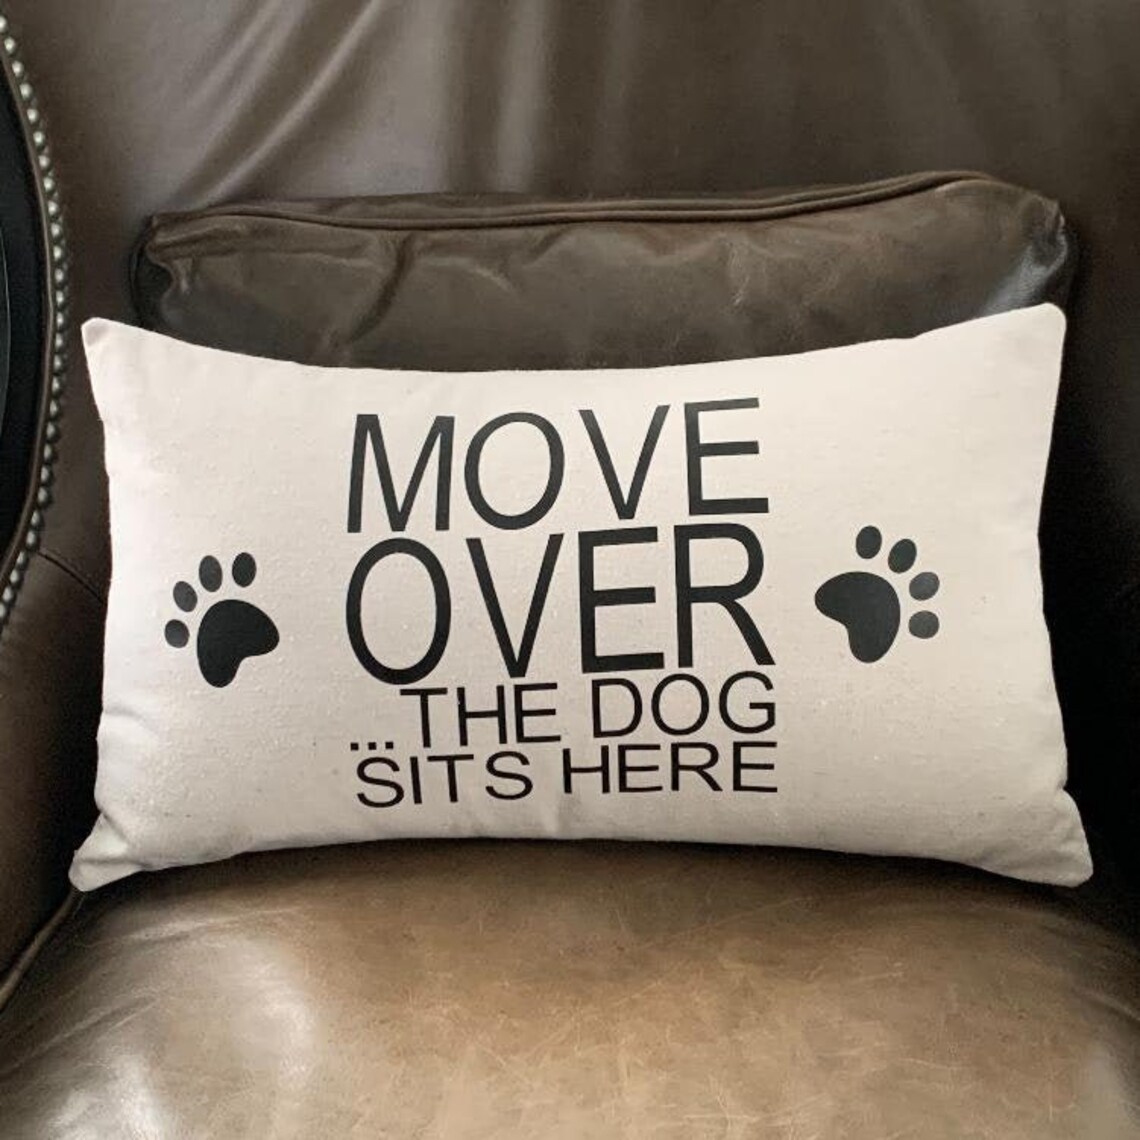 NEW Move over the dog sits here funny dog pillow - Etsy 日本